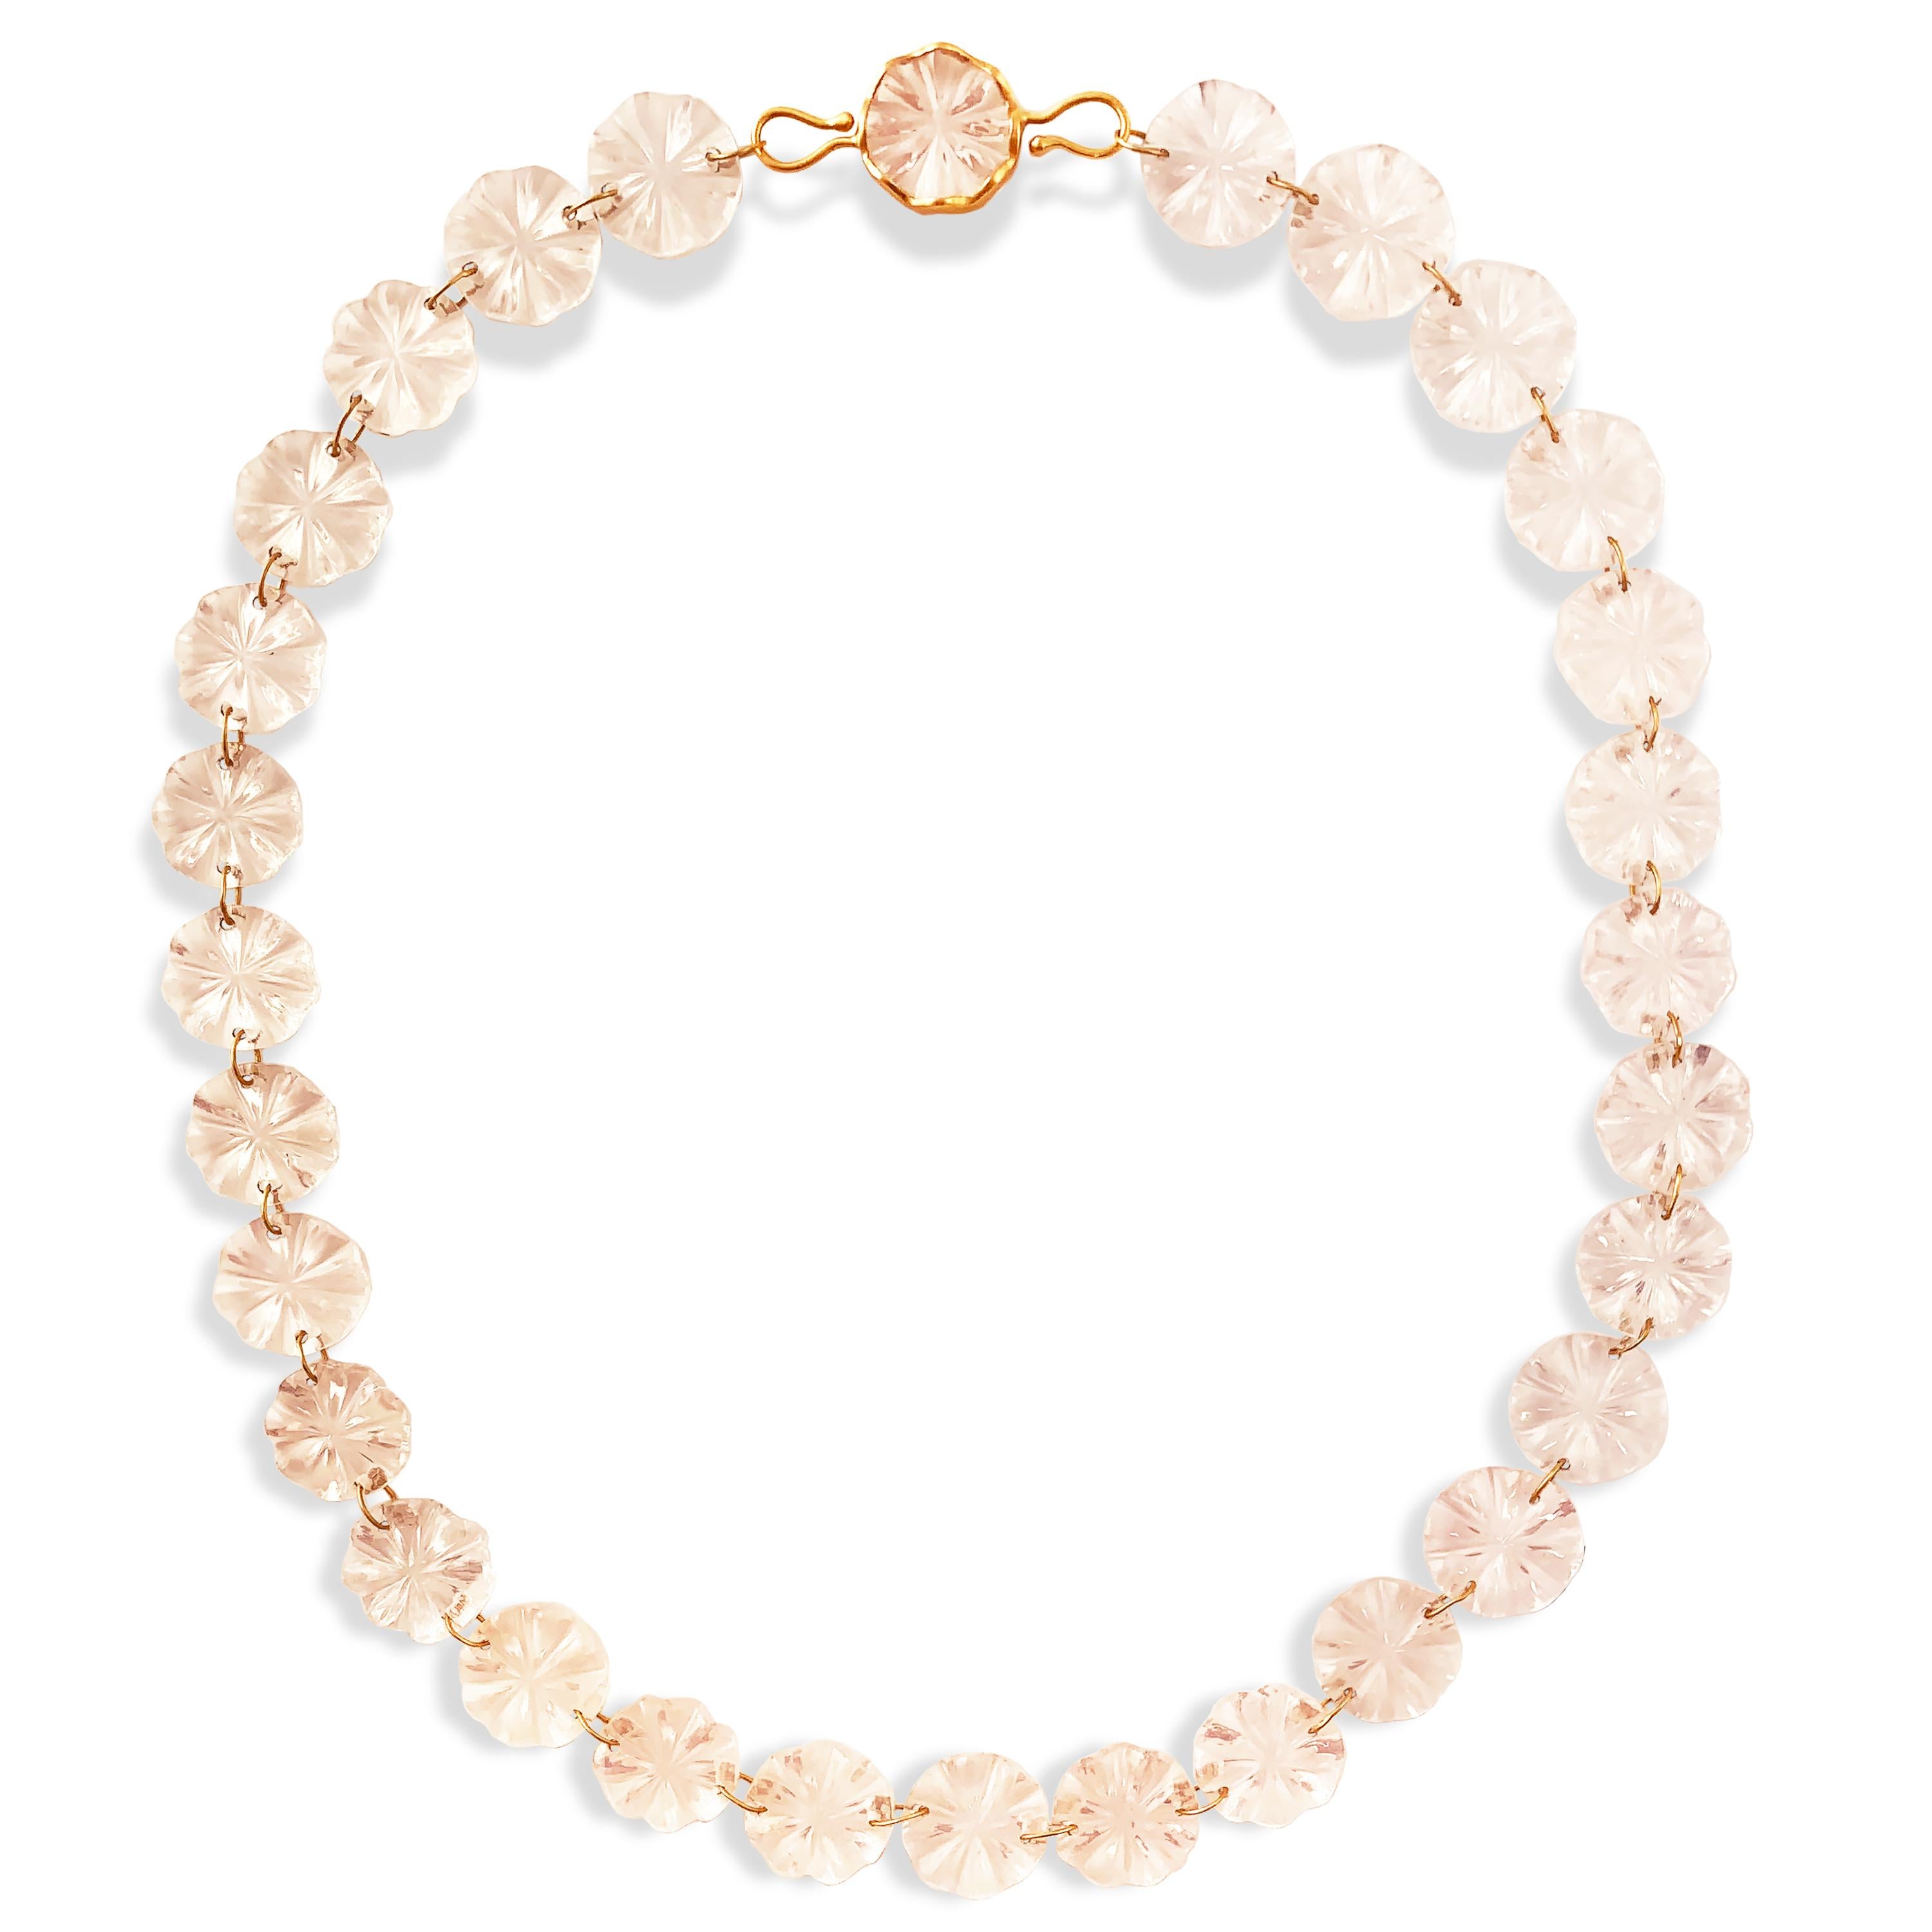 A dreamy necklace made of 240 carats of hand carved Rose Quartz discs.  Made as part of Ico & the Bird's 'Ocean Collection,' the necklace is composed of jump rings connecting the discs and completed with a disk set in a wavy bezel with a hook